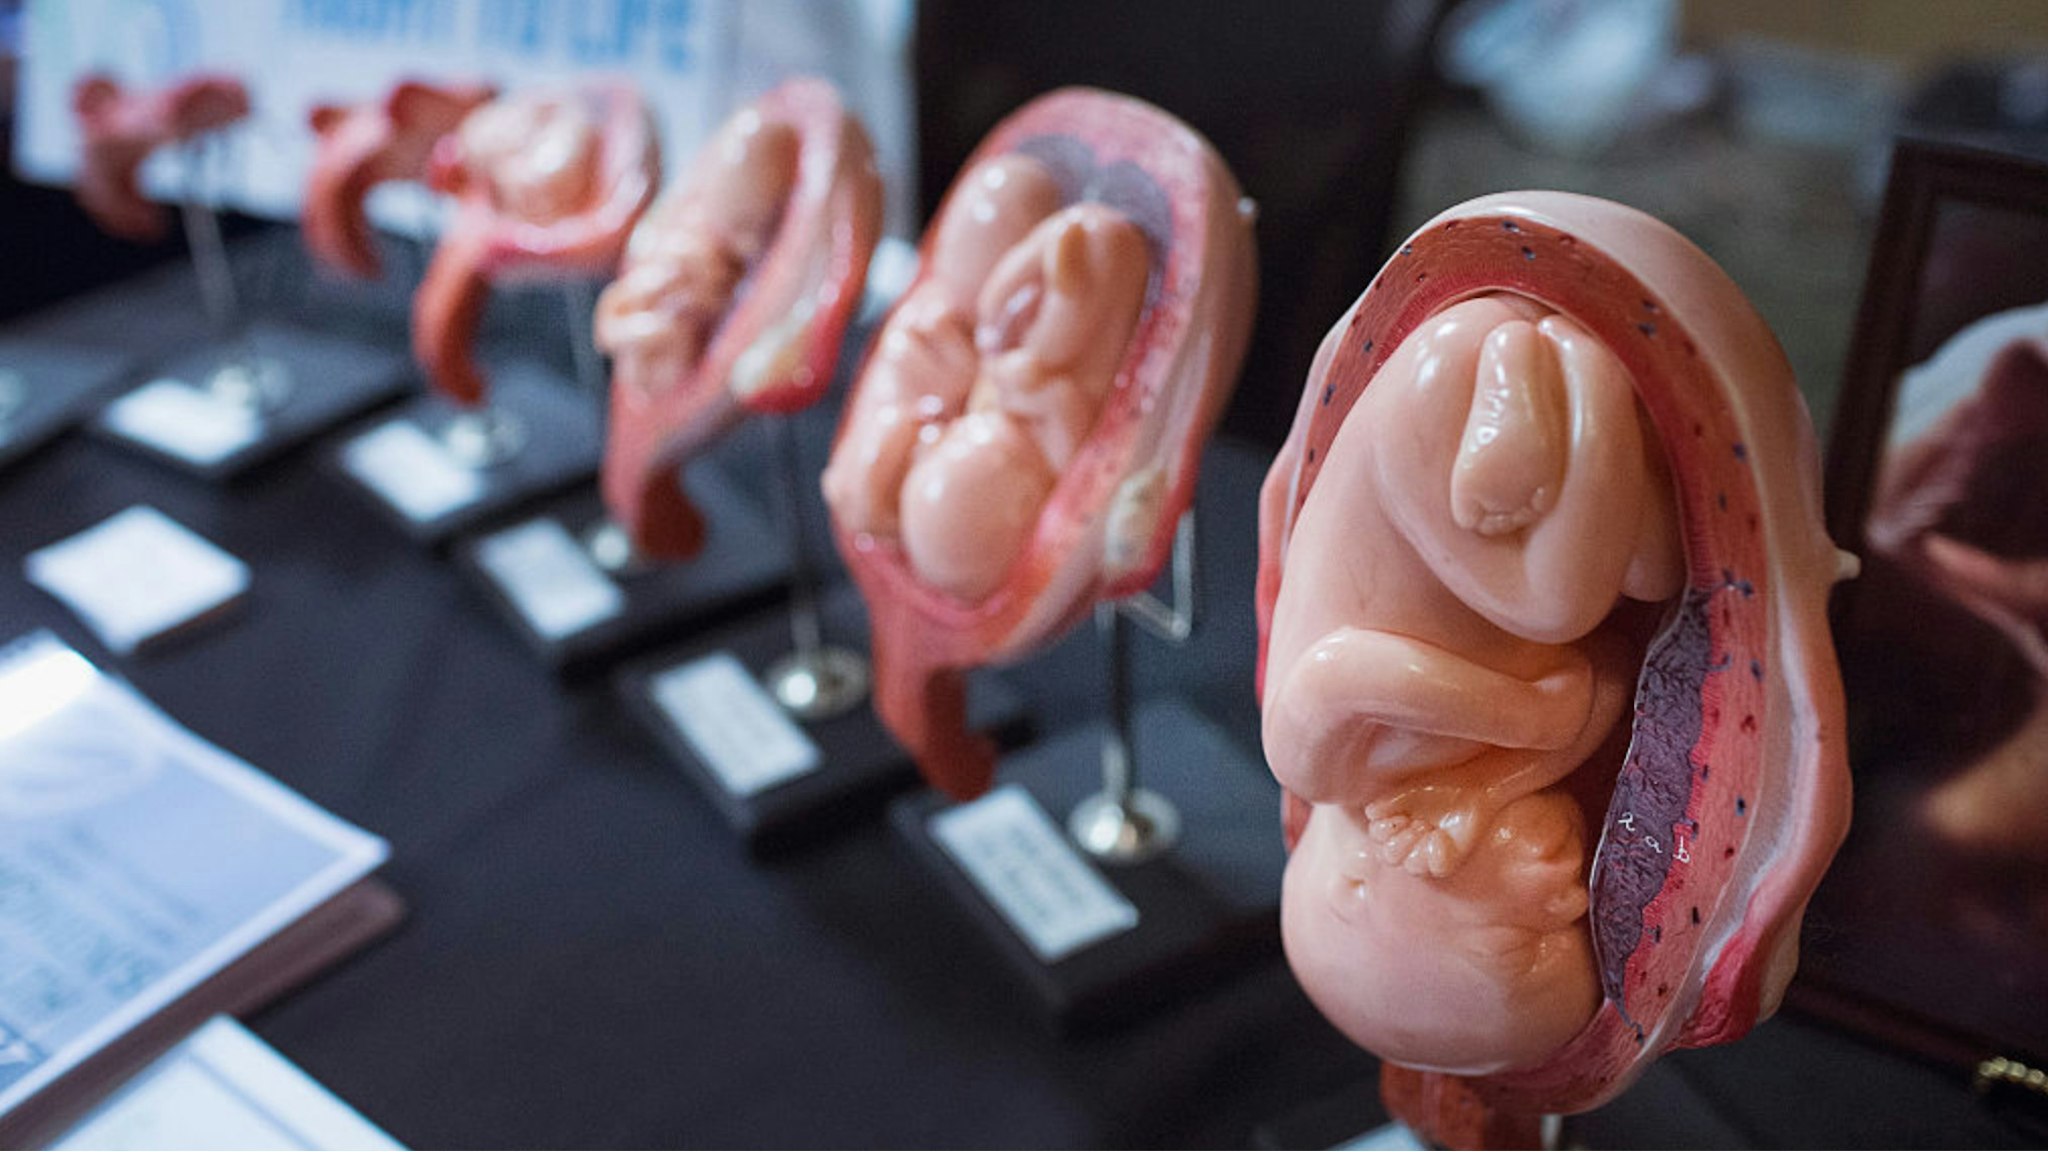 Stages of a fetus are displayed at the Illinois Right To Life a table while Republican presidential hopeful and former Arkansas Governor Mike Huckabee speaks at the Freedom's Journal Institute for the Study of Faith and Public Policy 2015 Rise Initiative on July 31, 2015 in Tinley Park, Illinois.